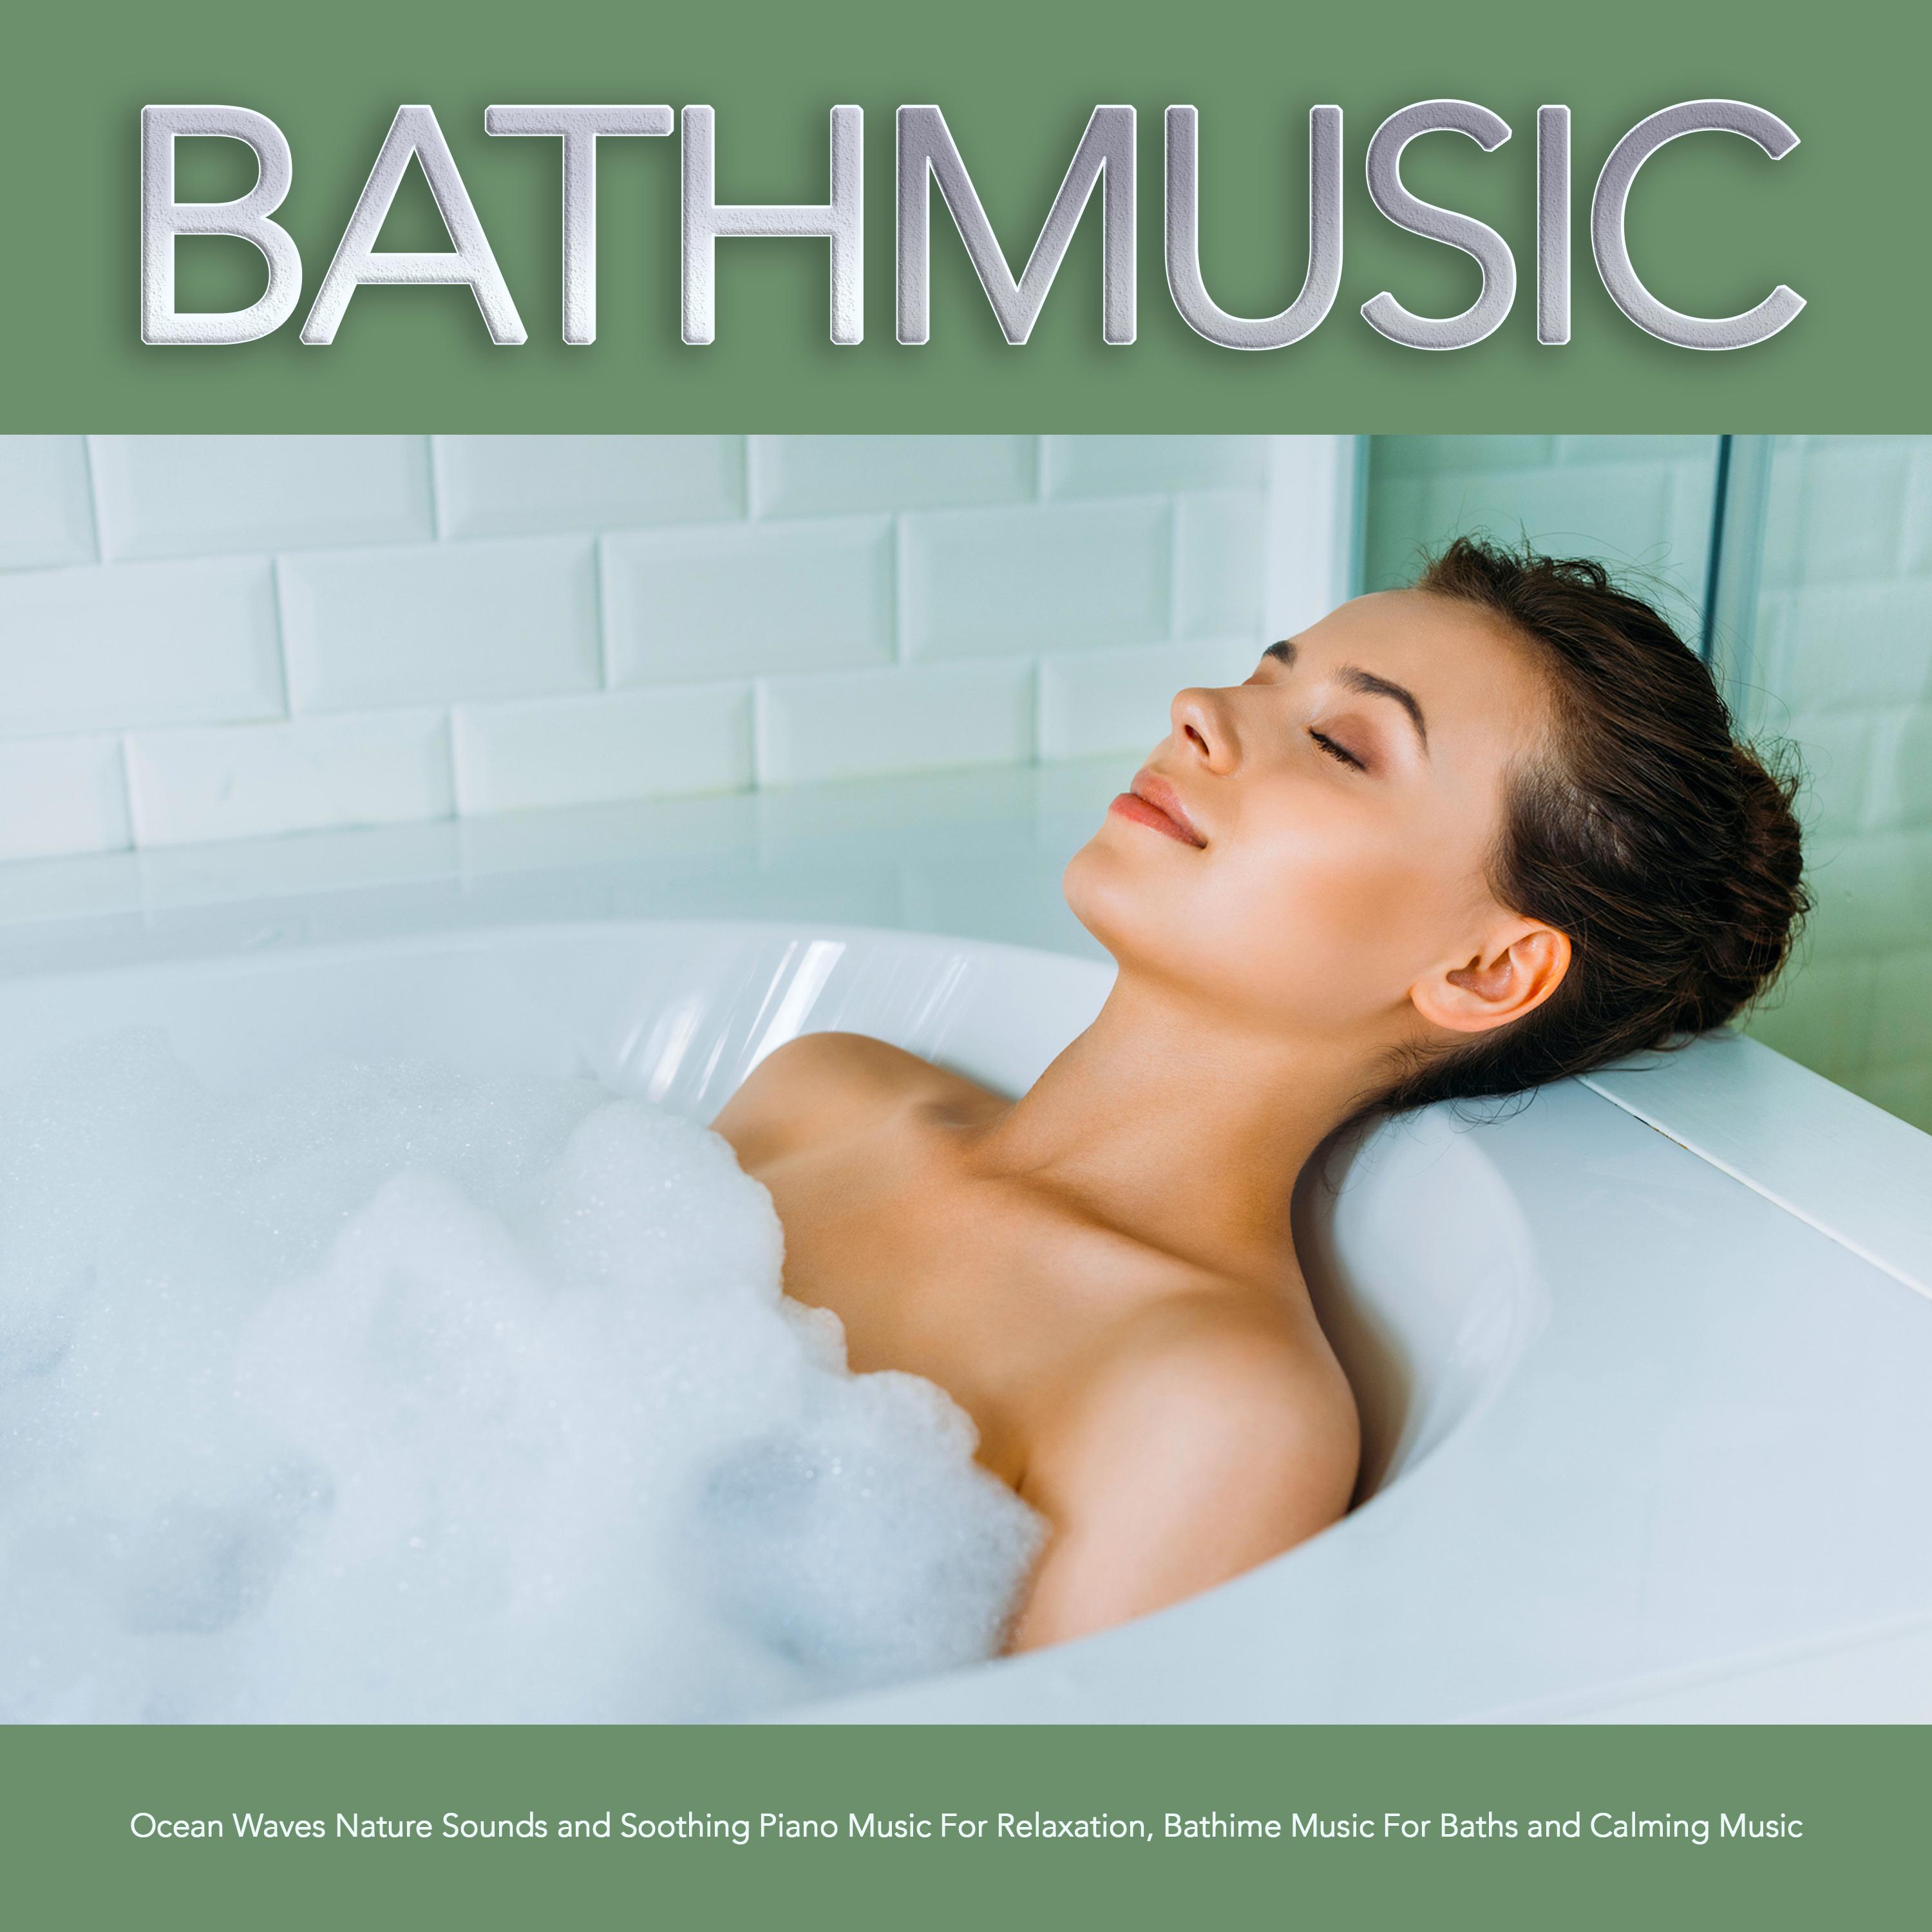 Ocean Waves and Music For The Bath